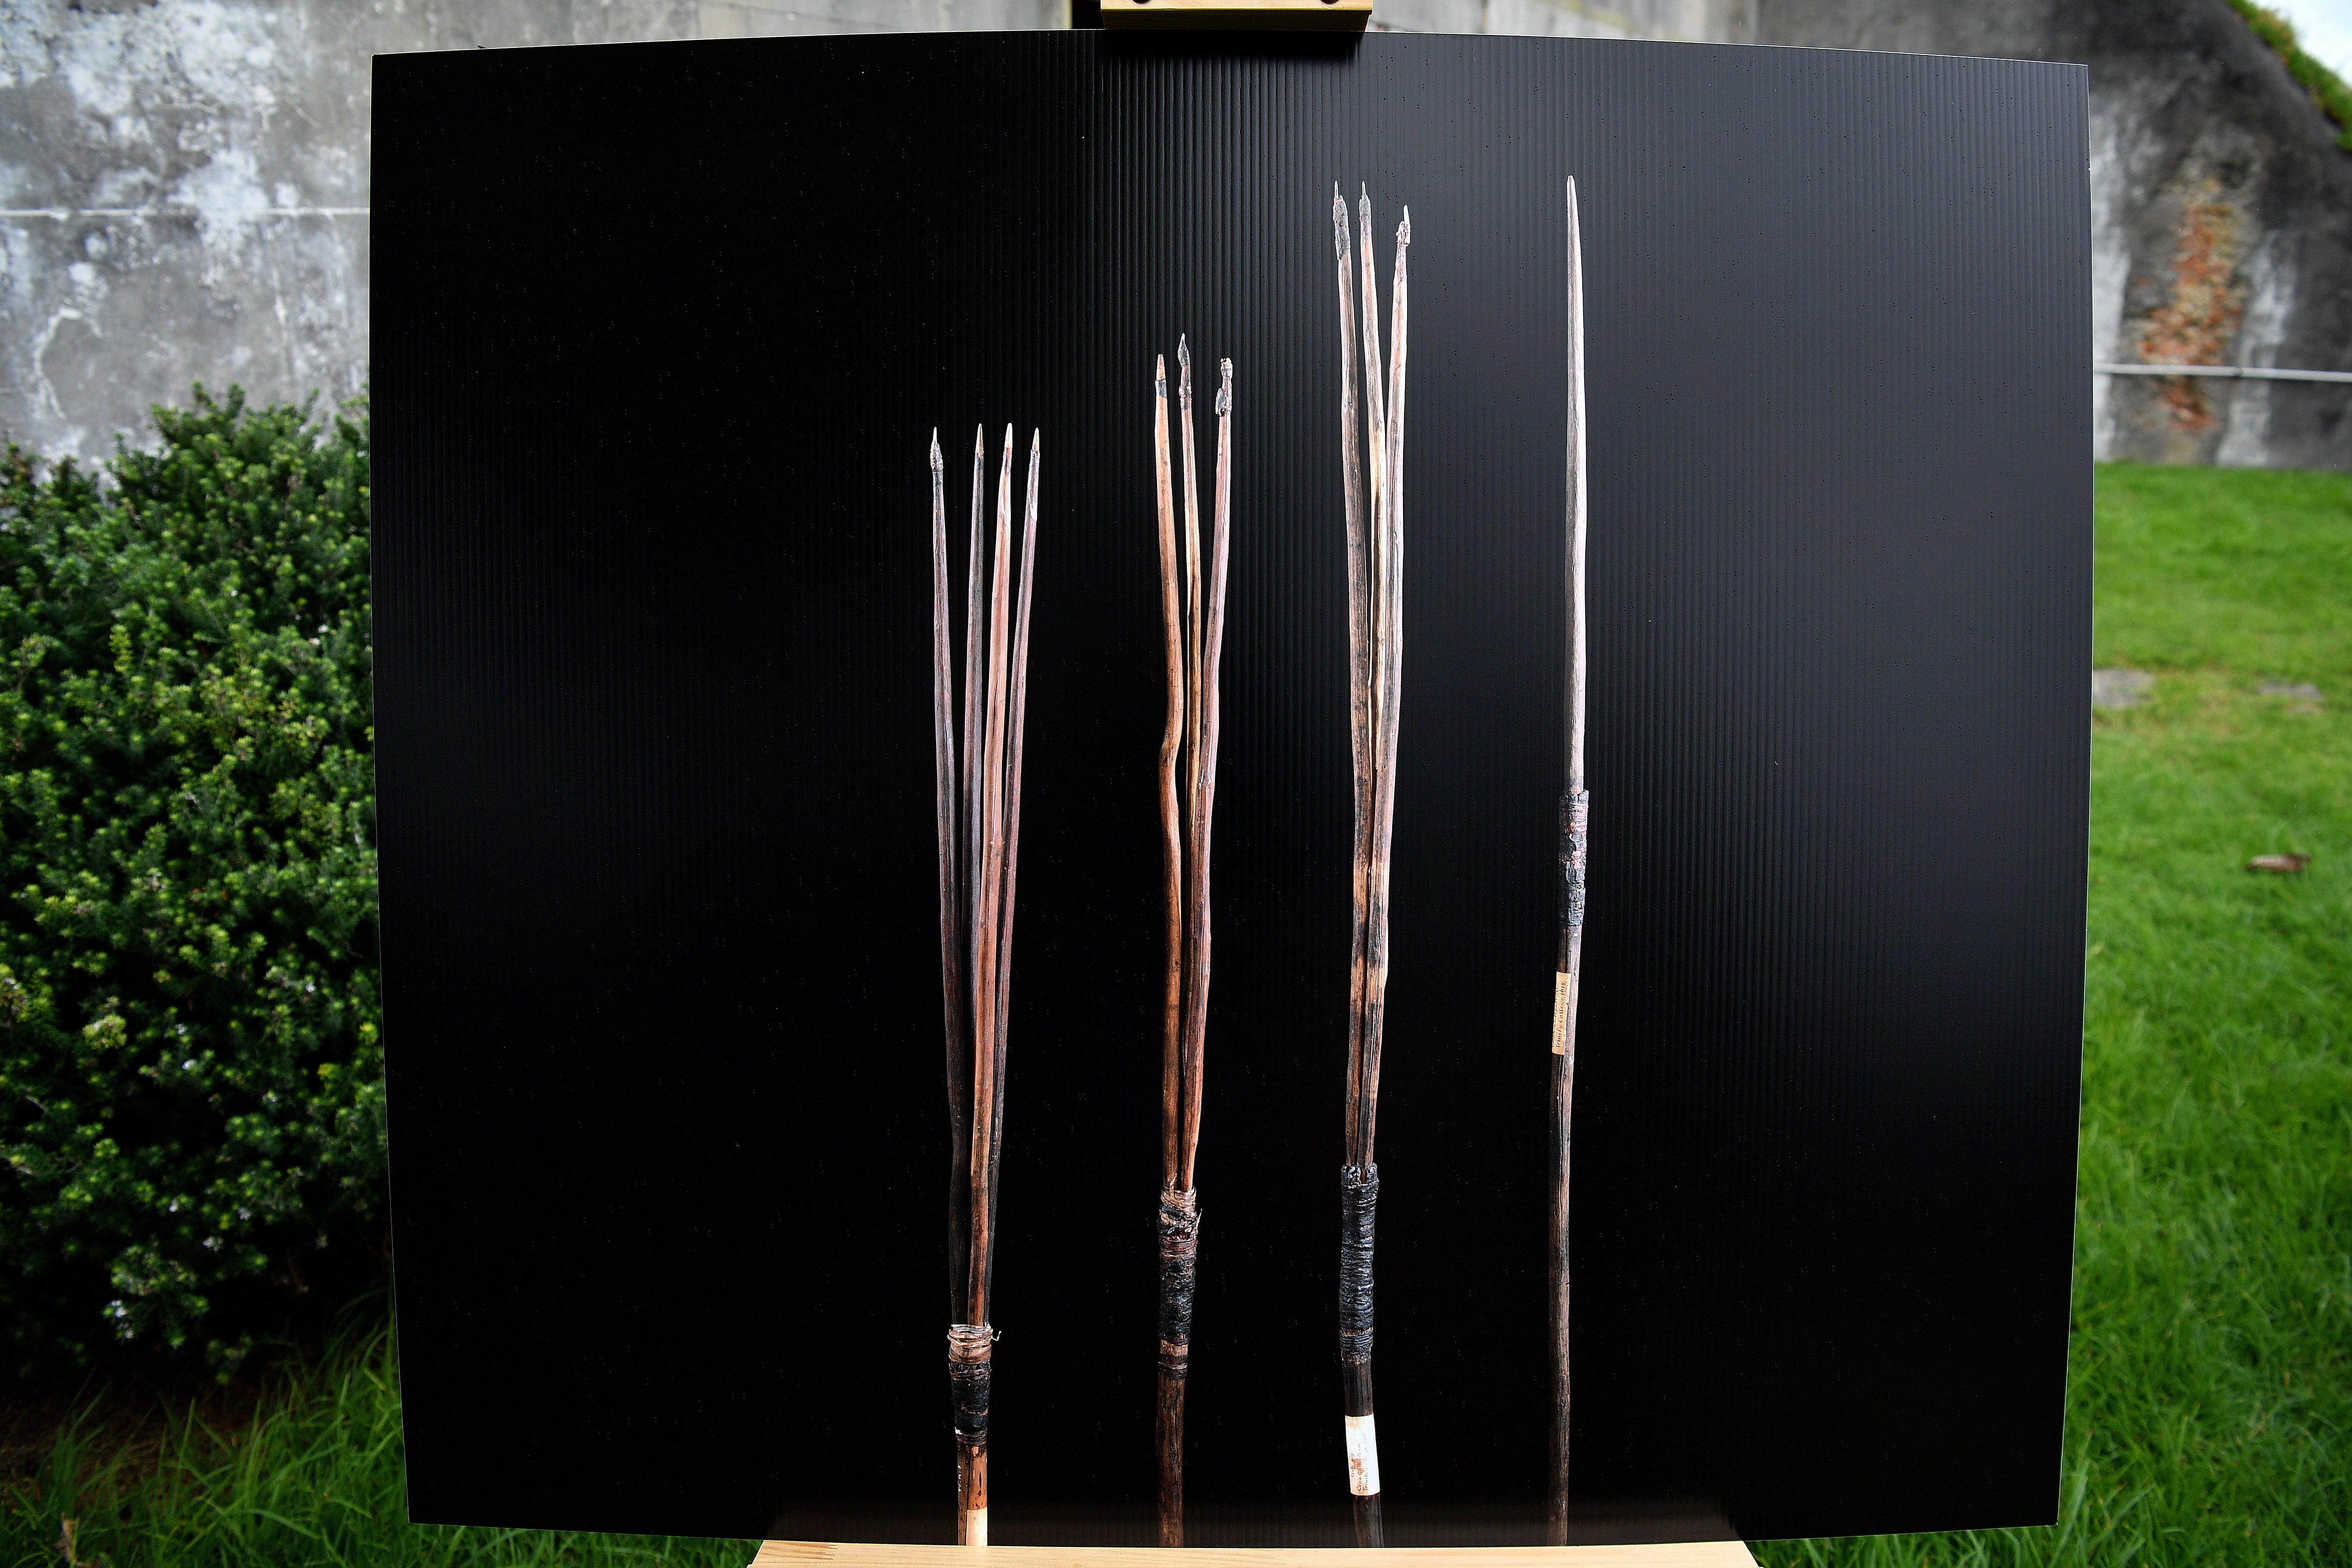 A photograph of the four historic Australian Aboriginal Kamay spears that will be repatriated back to Country is seen during a press conference on Bare Island, in Sydney, Australia on 2 March 2023